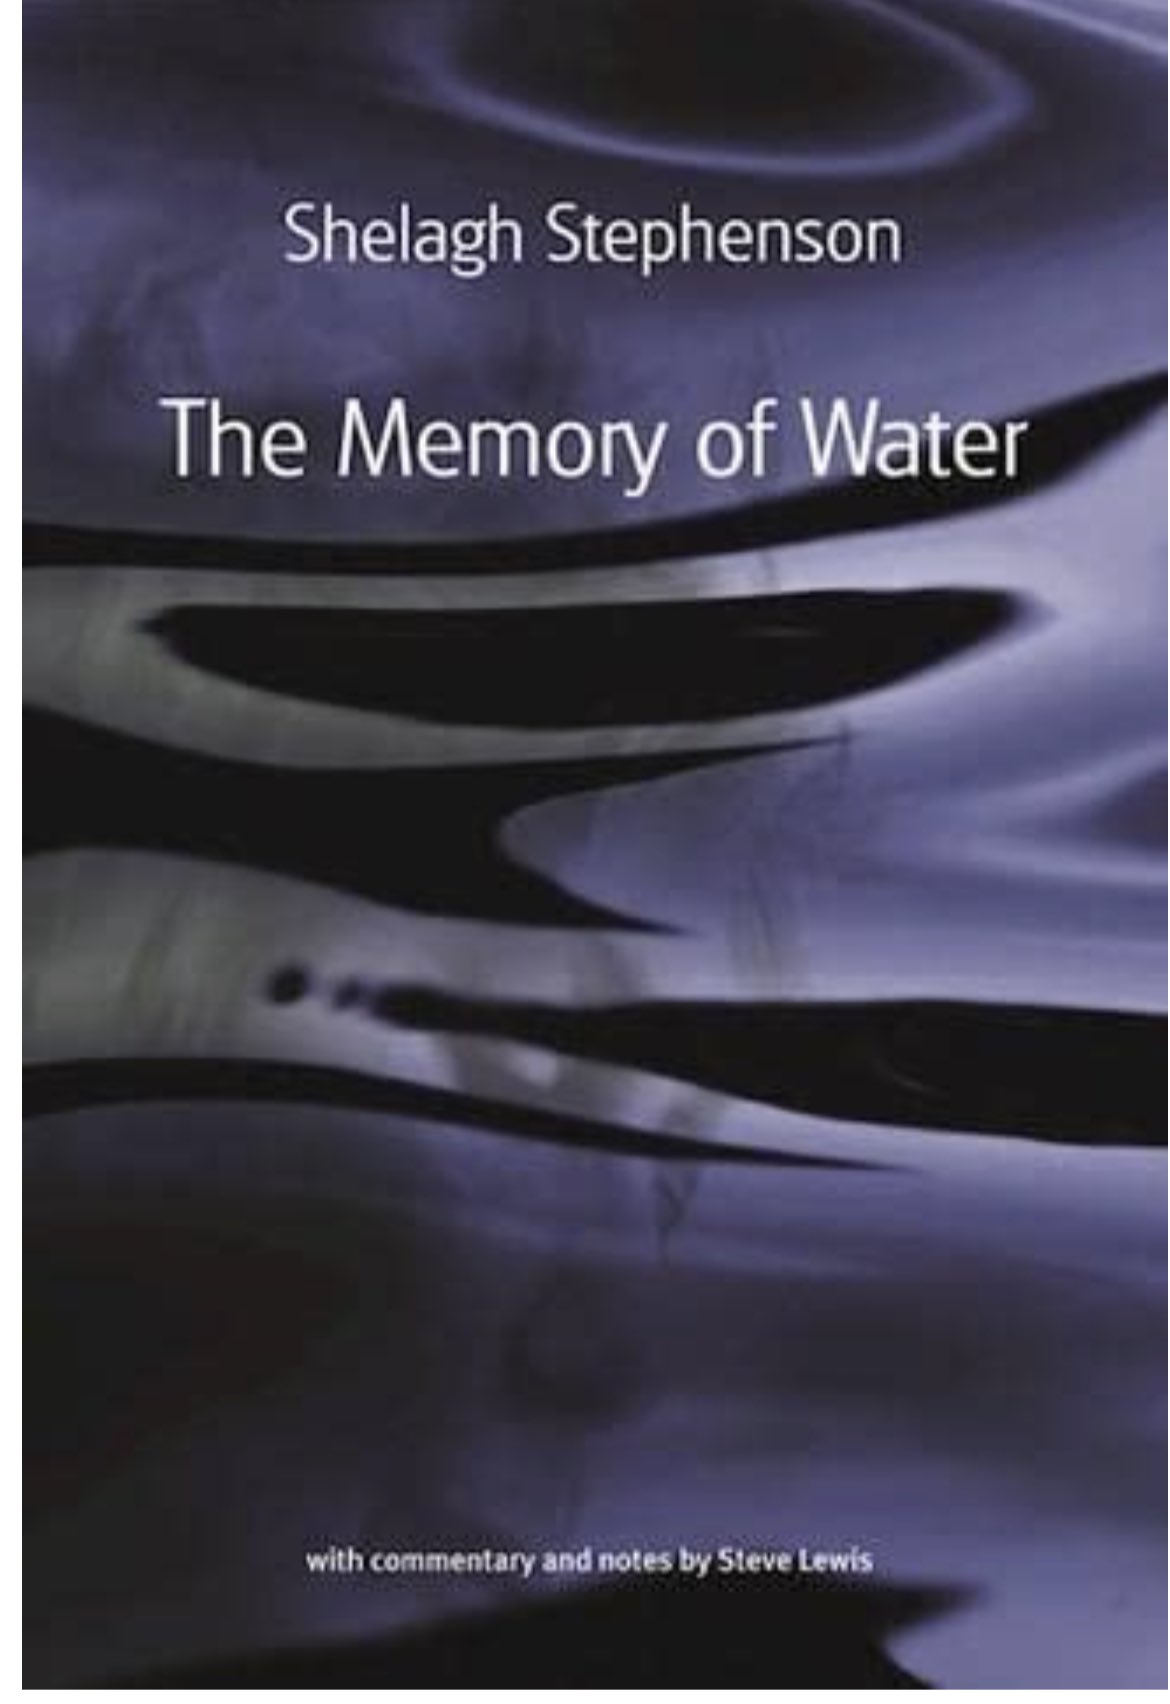 Memory of Water Blu-Ray Release